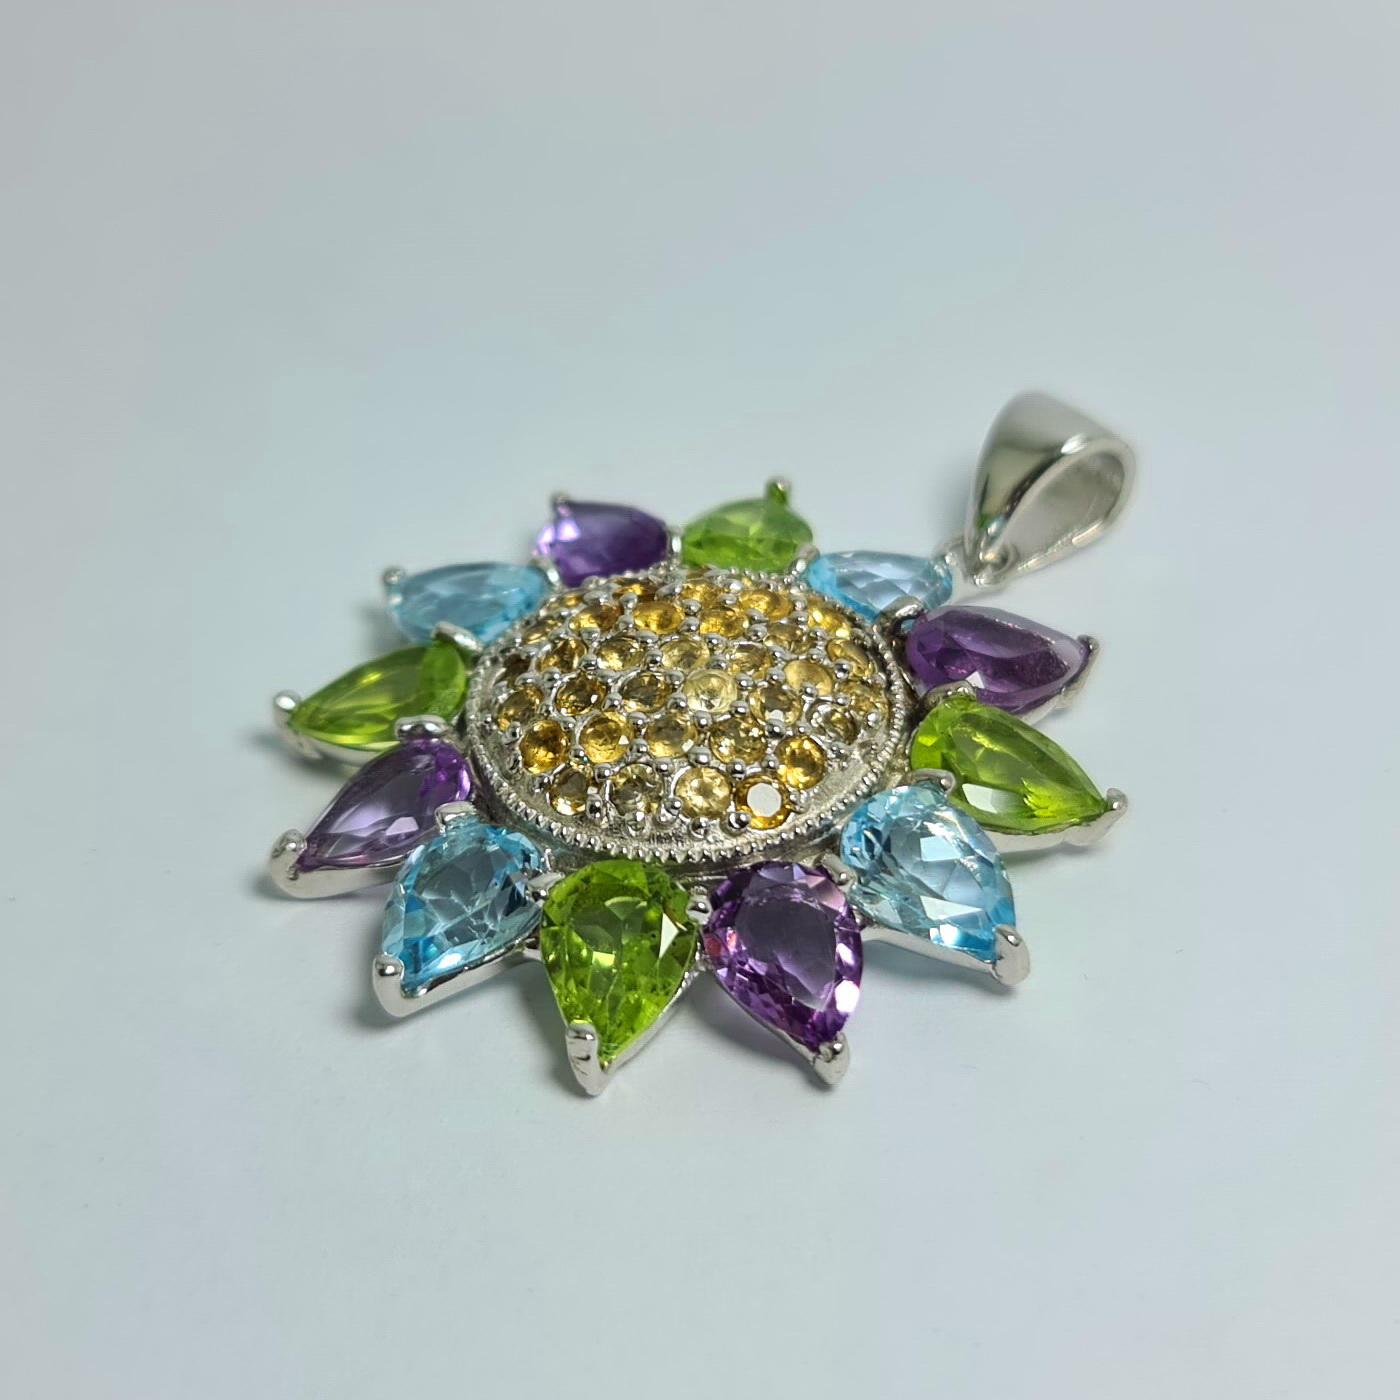 Natural Blue Topaz Peridot Amethyst Citrine Sun Flower Pendant set in Pure .925 Sterling Silver with Rhodium Plating 
Total carat weight : 13 carats